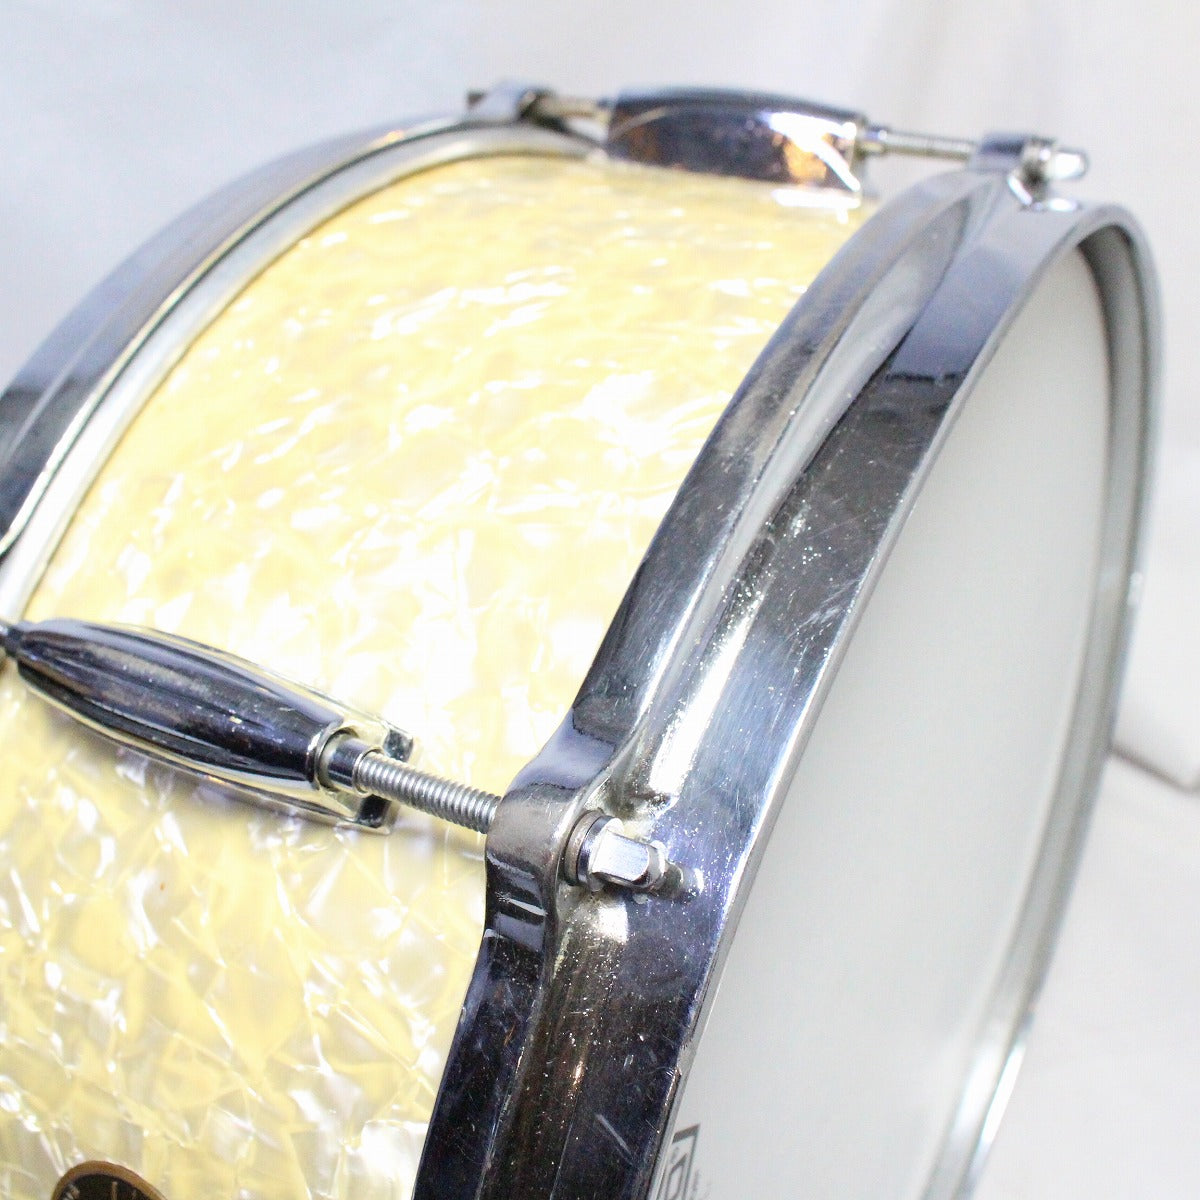 USED GRETSCH / 60s #4105 14x5.5 Snare Drum White Pearl 60s Gretsch Snare Drum [08]